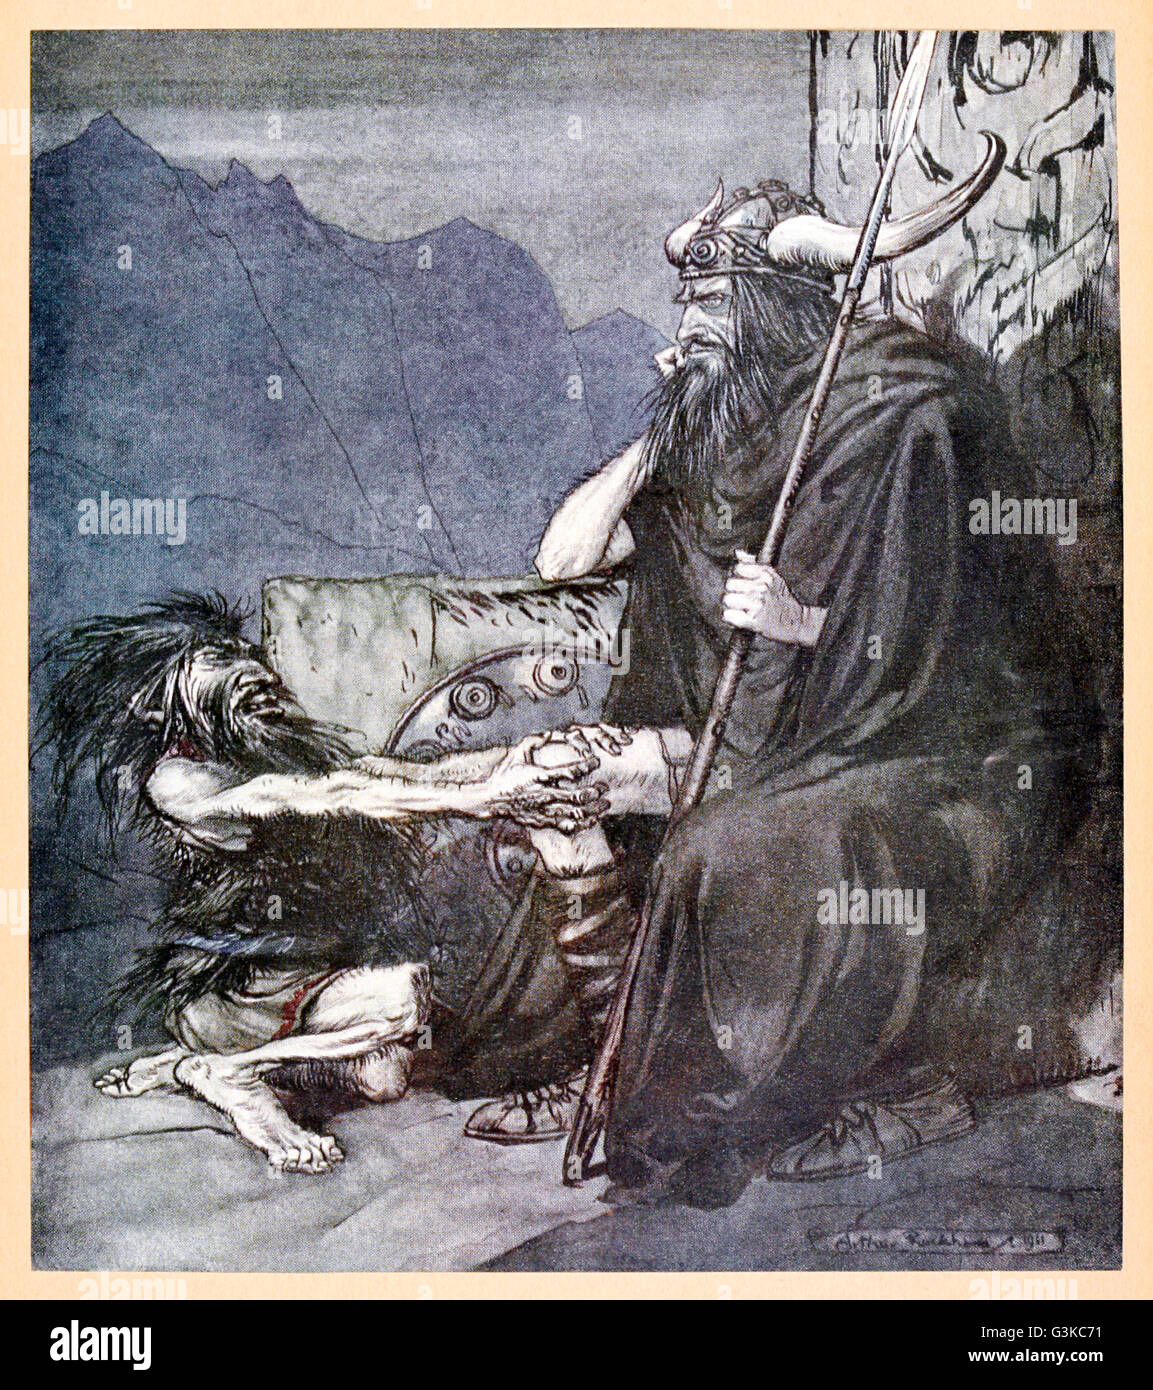 “Swear to me, Hagen, my son!” from 'Siegfried & The Twilight of the Gods' illustrated by Arthur Rackham (1867-1939). See description for more information. Stock Photo